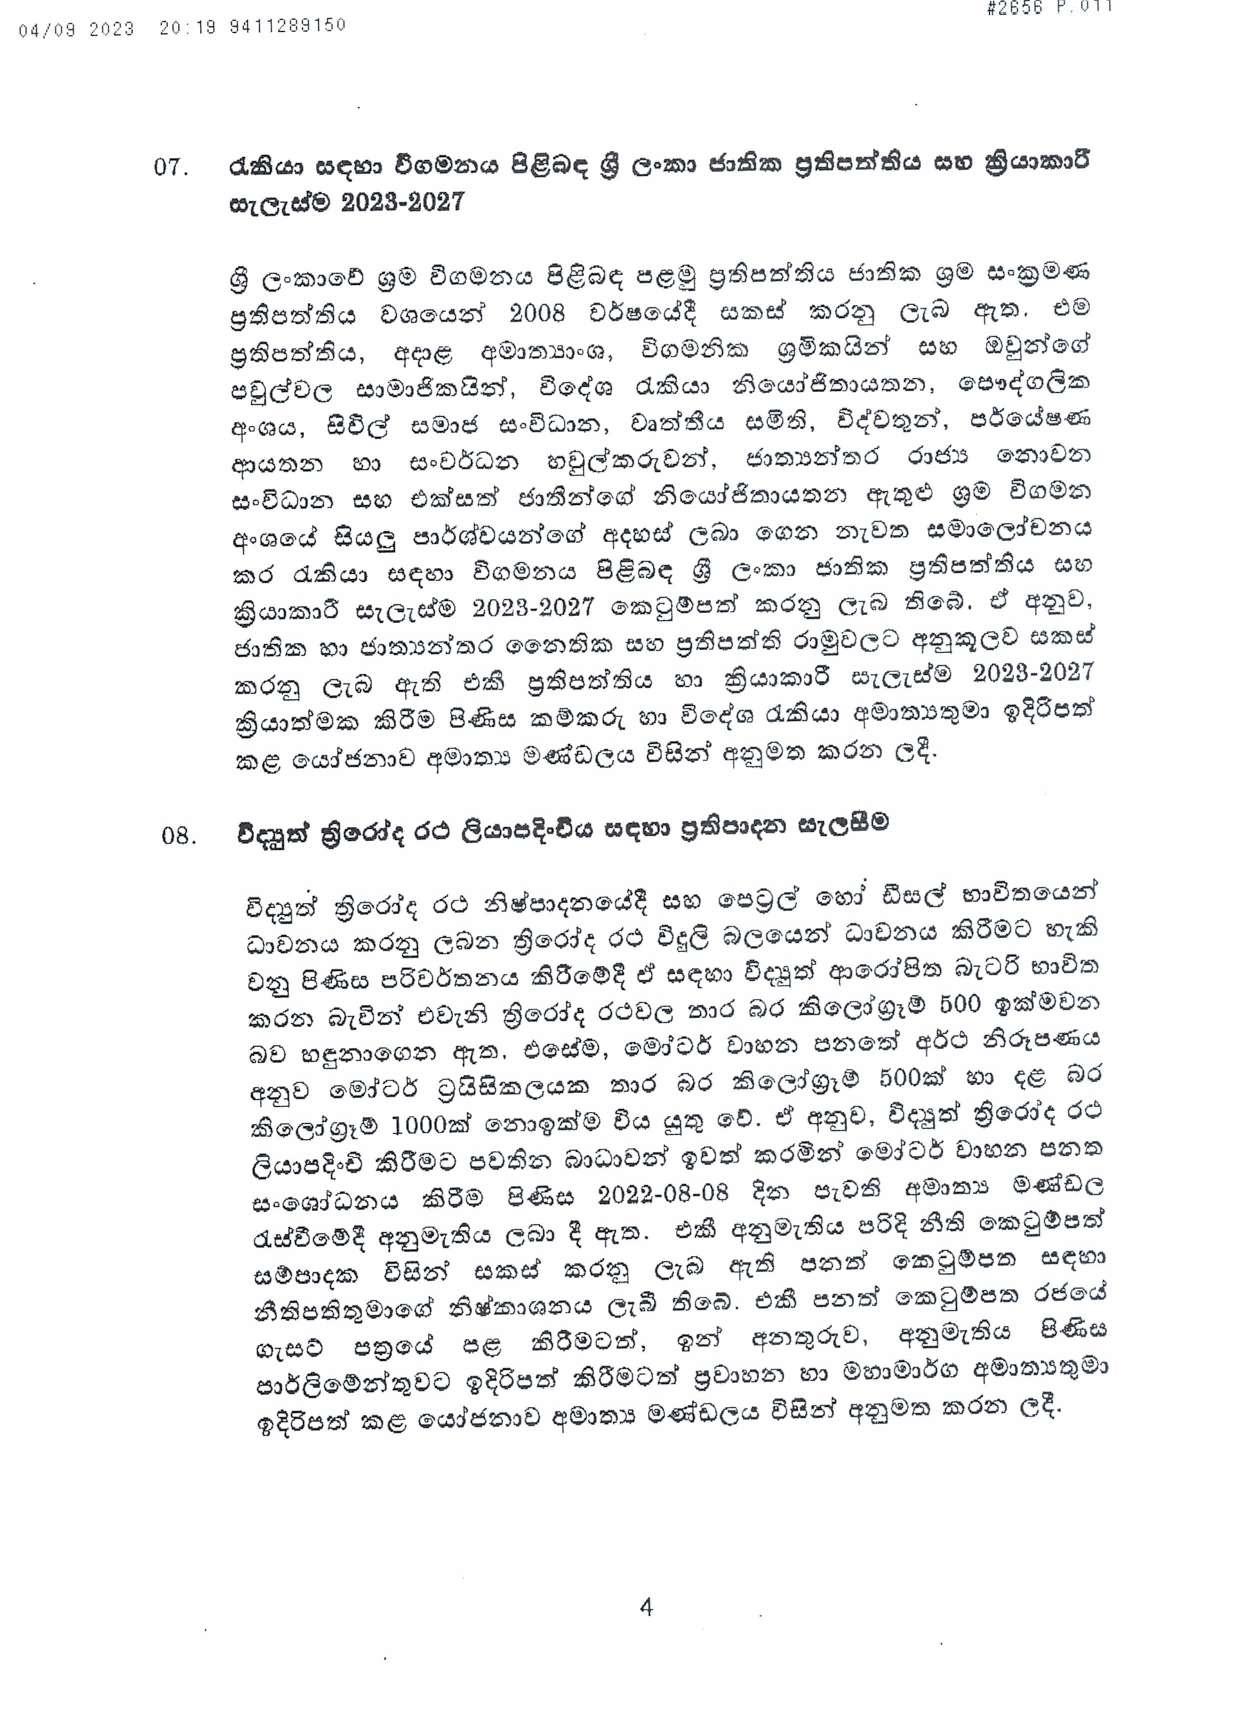 Cabinet Decision on 04.09.2023 page 004